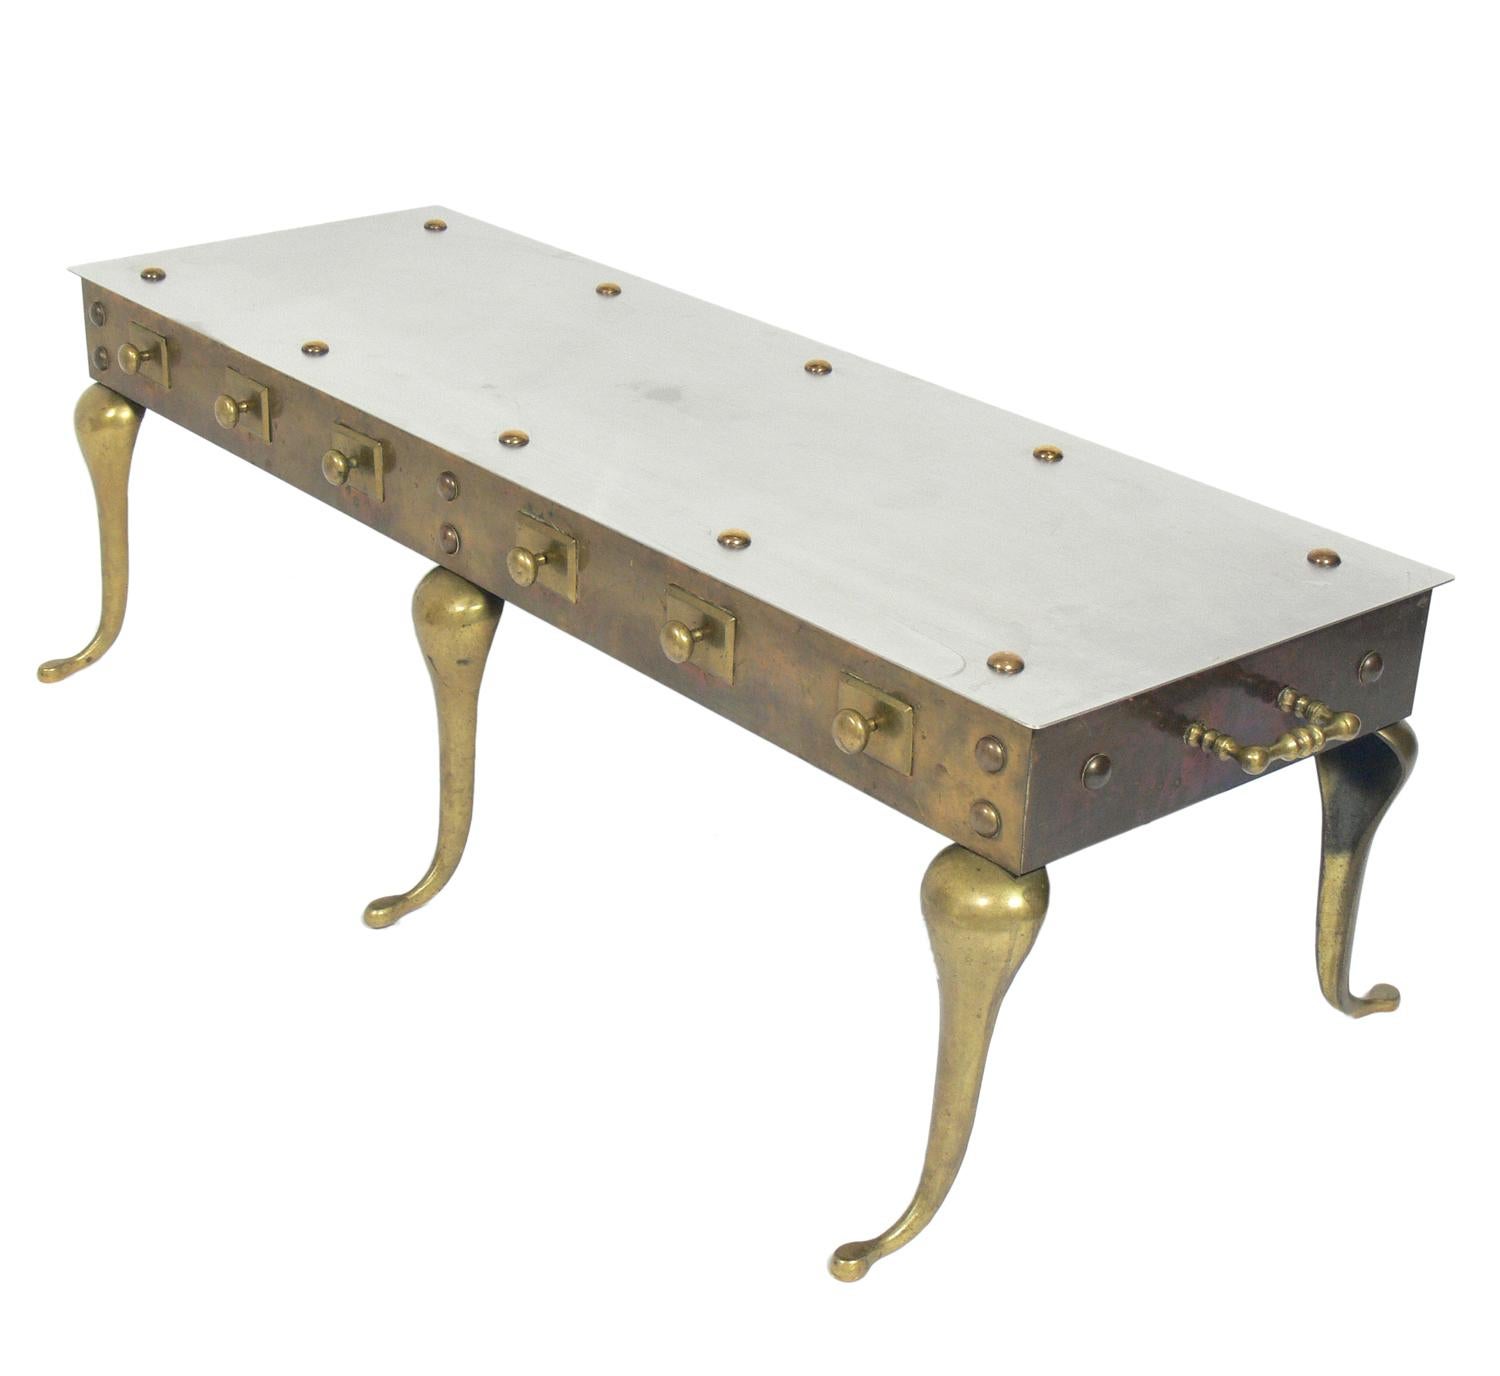 Brass and steel footman coffee table or bench, England, circa late 19th century. Originally used as a footman (a table used next to a cooking fire, where hot dishes and pots could be placed). This example has had it's top replaced with a steel top